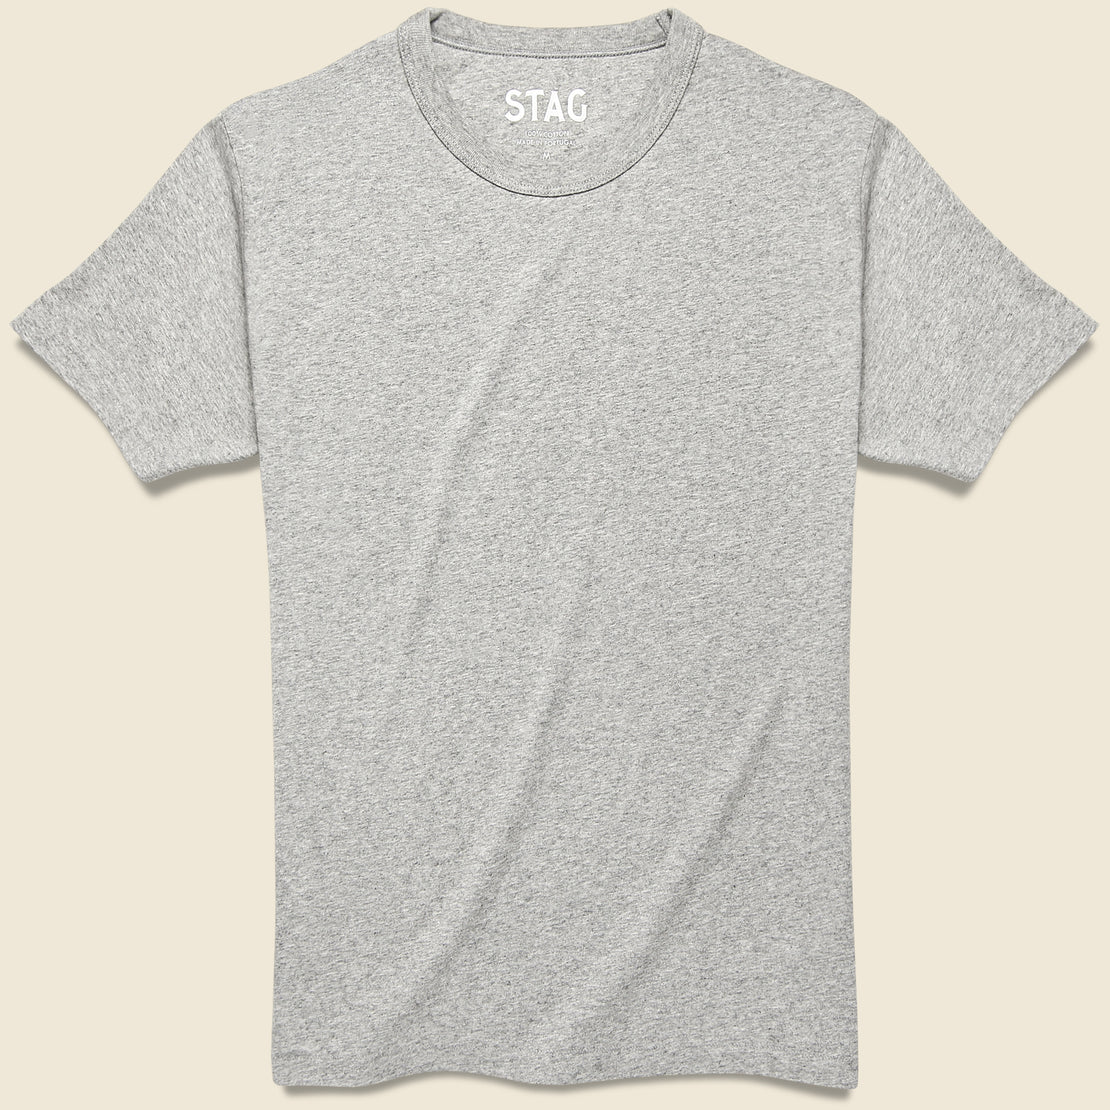 STAG STAG Tee - Grey